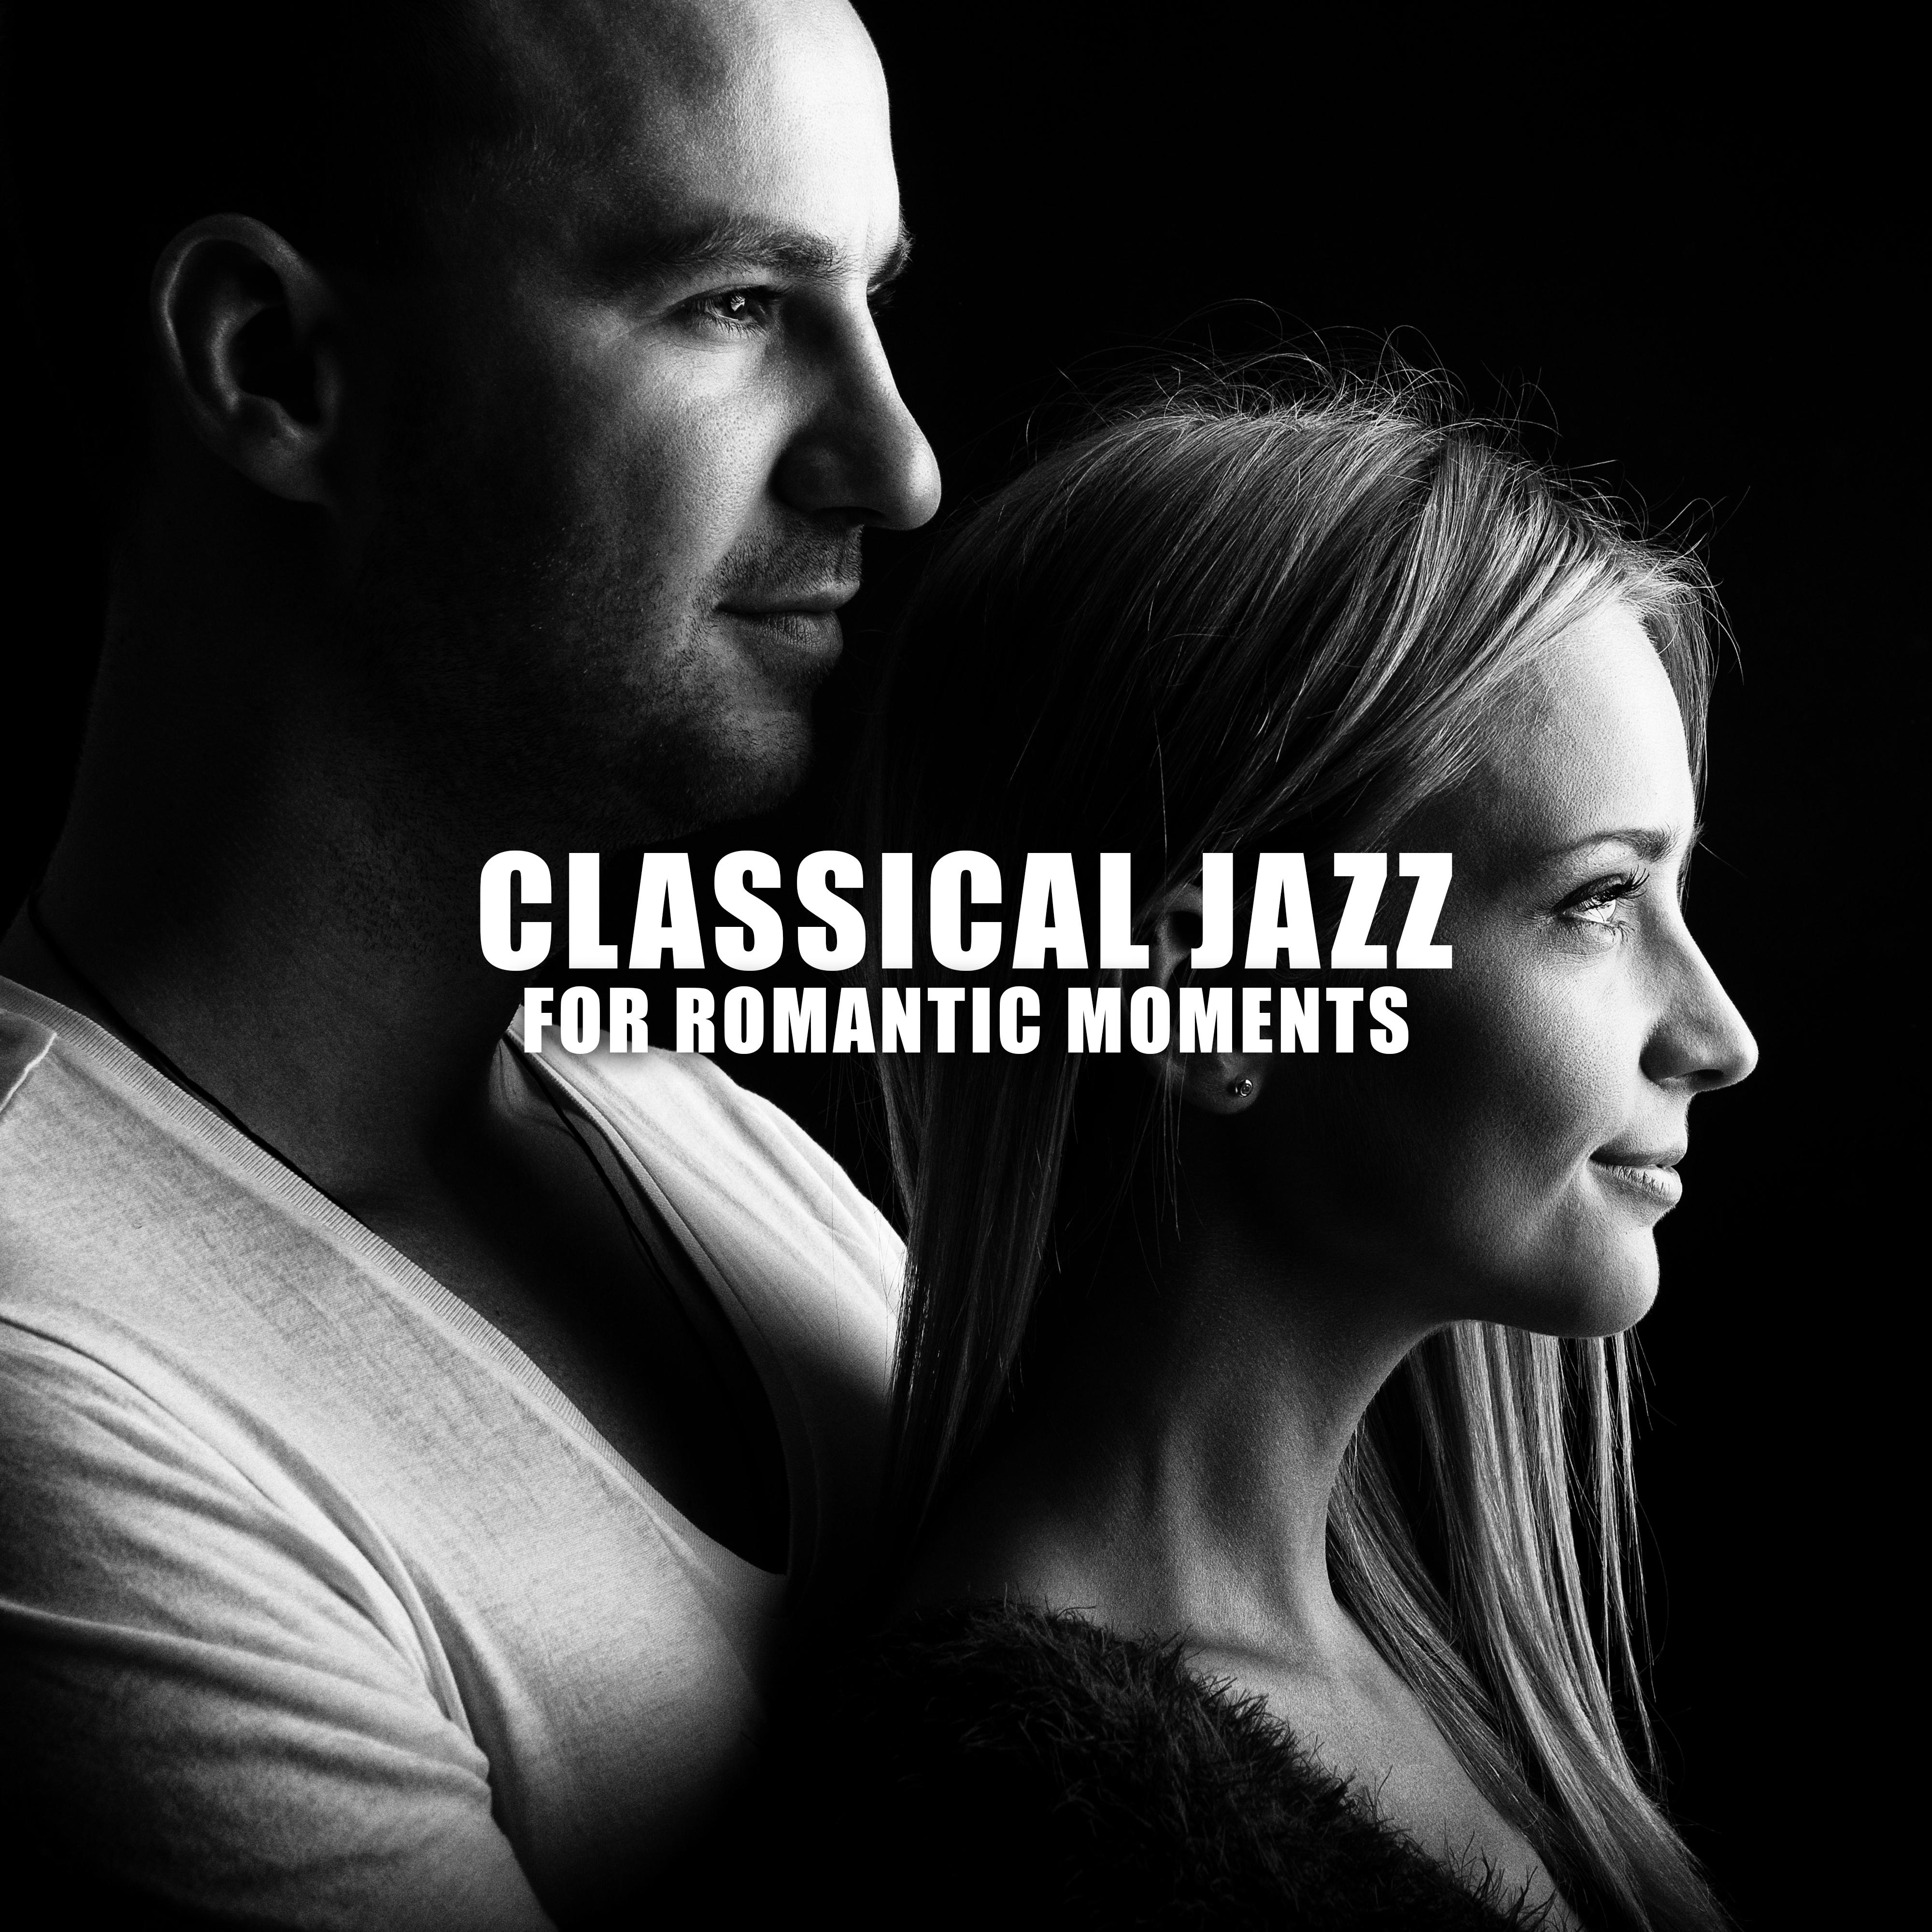 Classical Jazz for Romantic Moments  Instrumental Music for Lovers, Intimate Moments, Romantic Vibes, Jazz Lounge, Sensual Music at Night